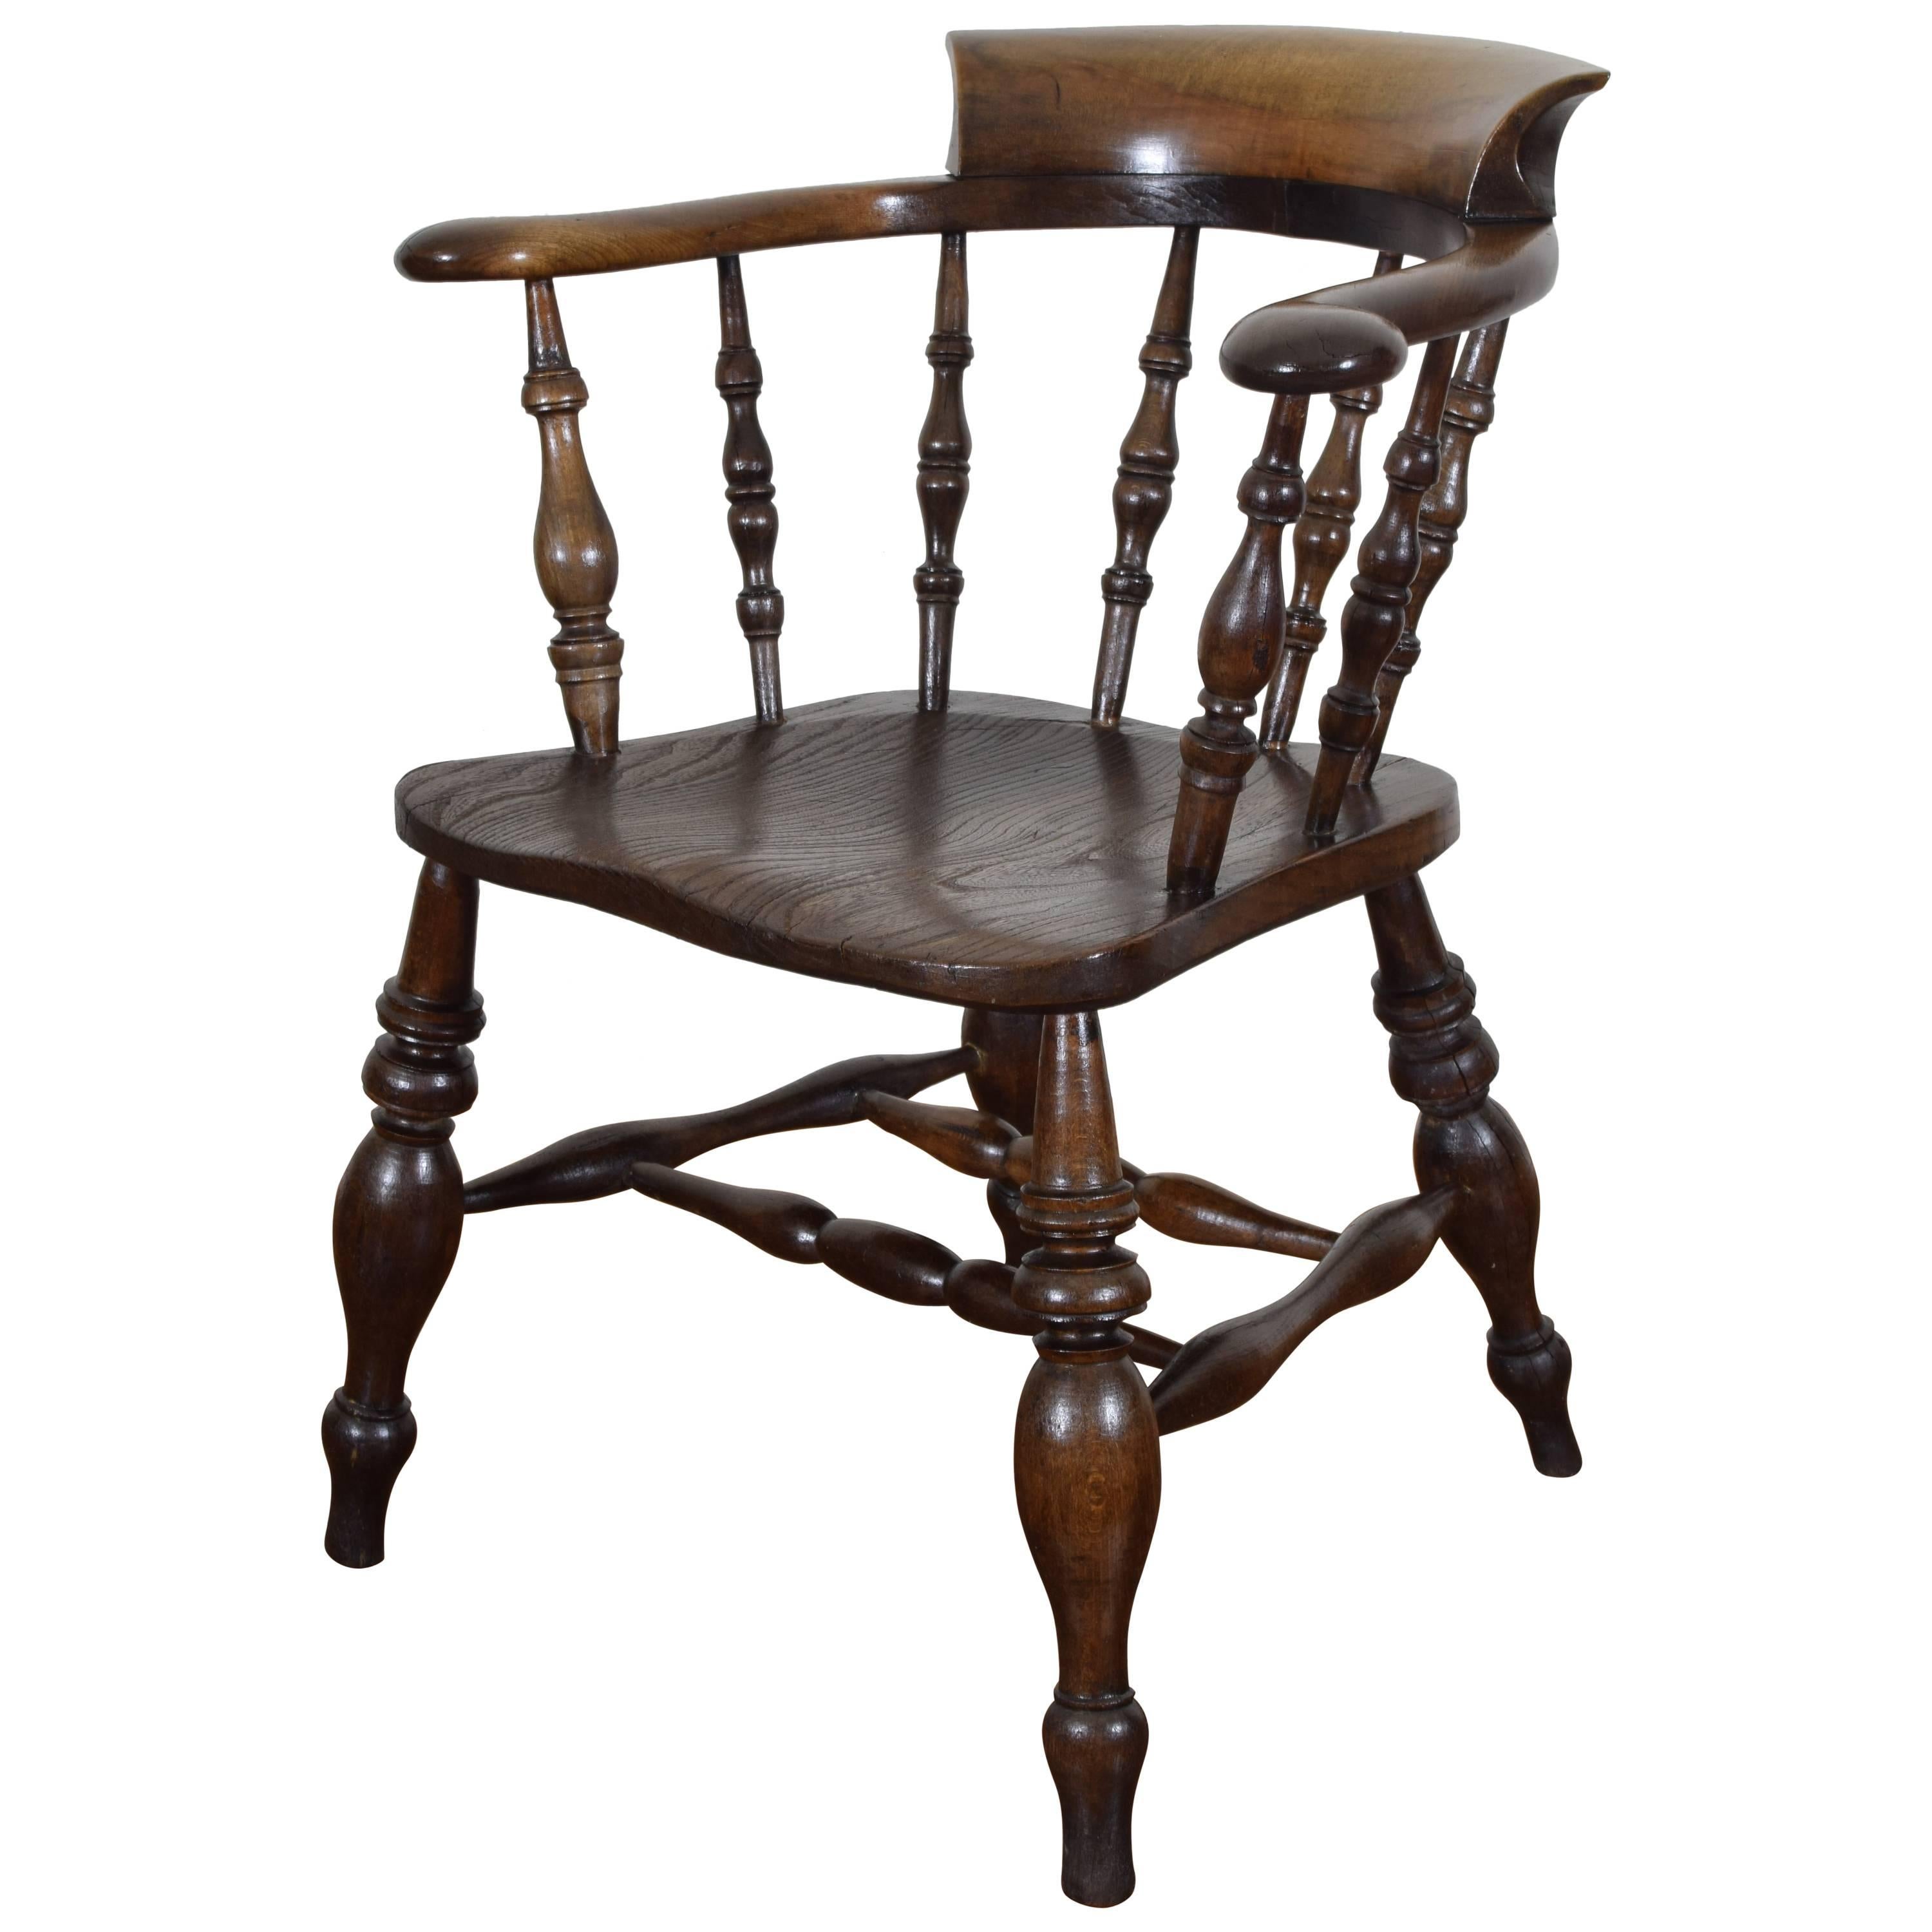 English Turned Chestnut Windsor Chair, 19th Century